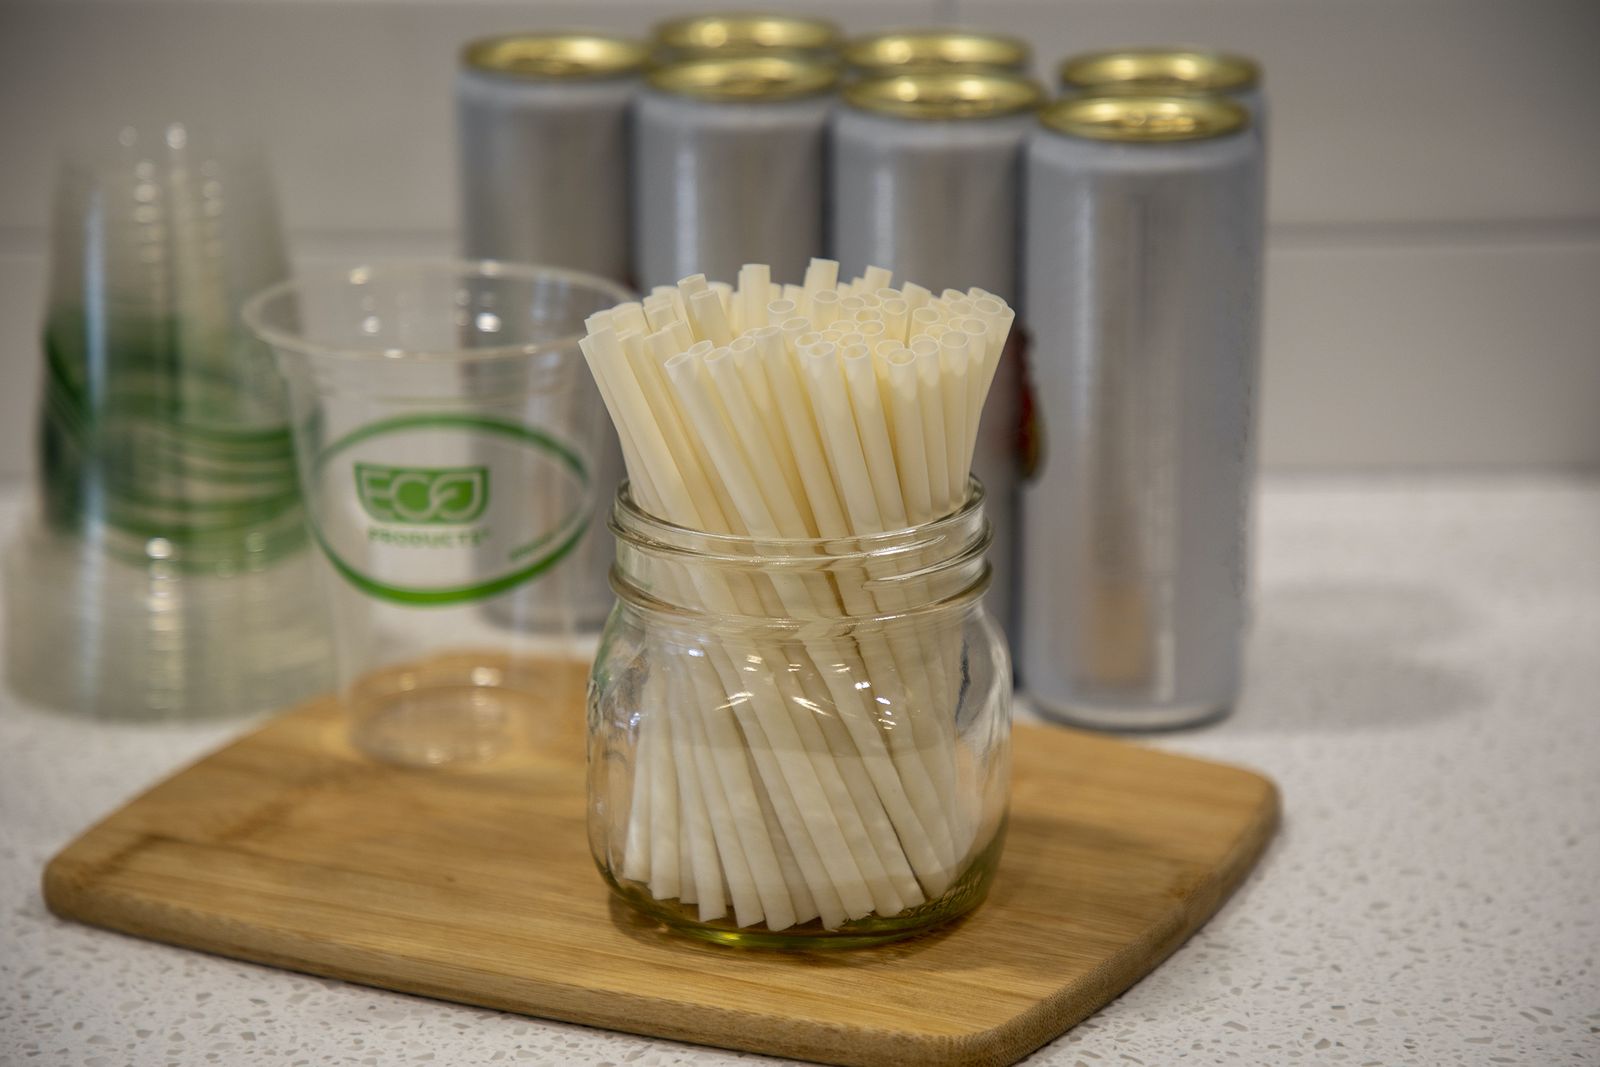 Eco-Products Launches New Line of Compostable Straws Made from Plant-Based Plastic